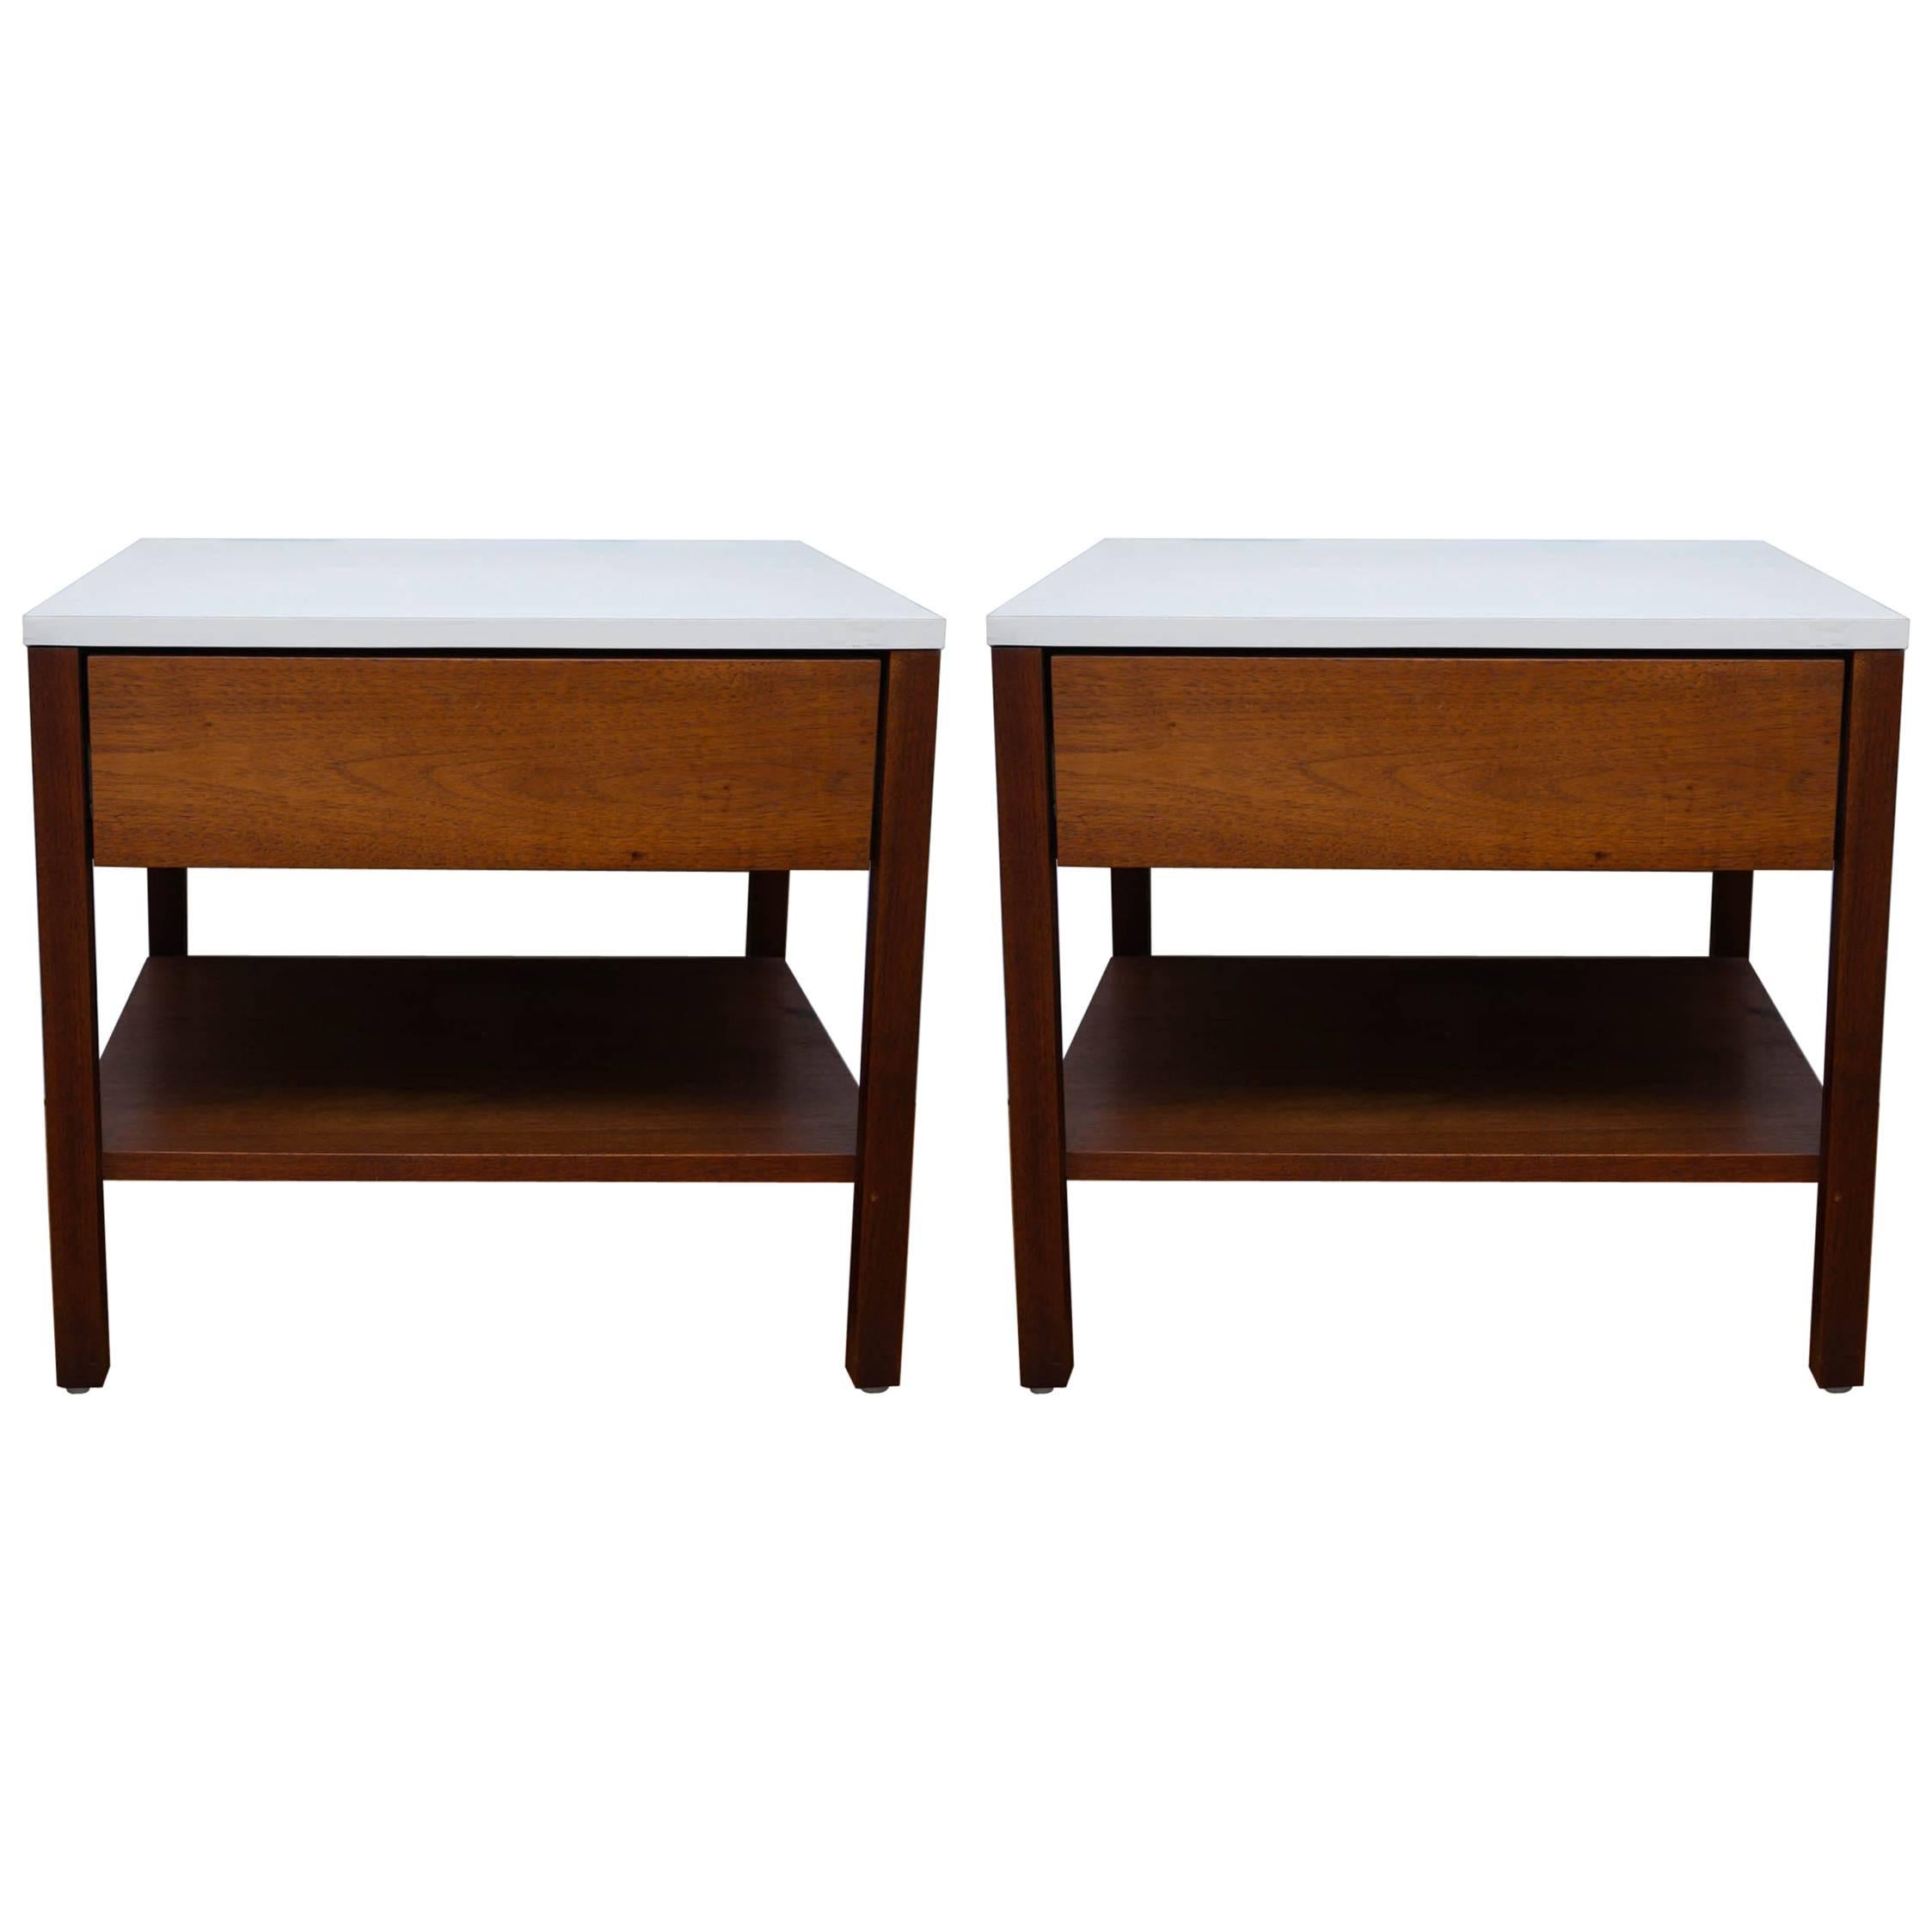 Pair of Knoll Walnut End Tables / Nightstands